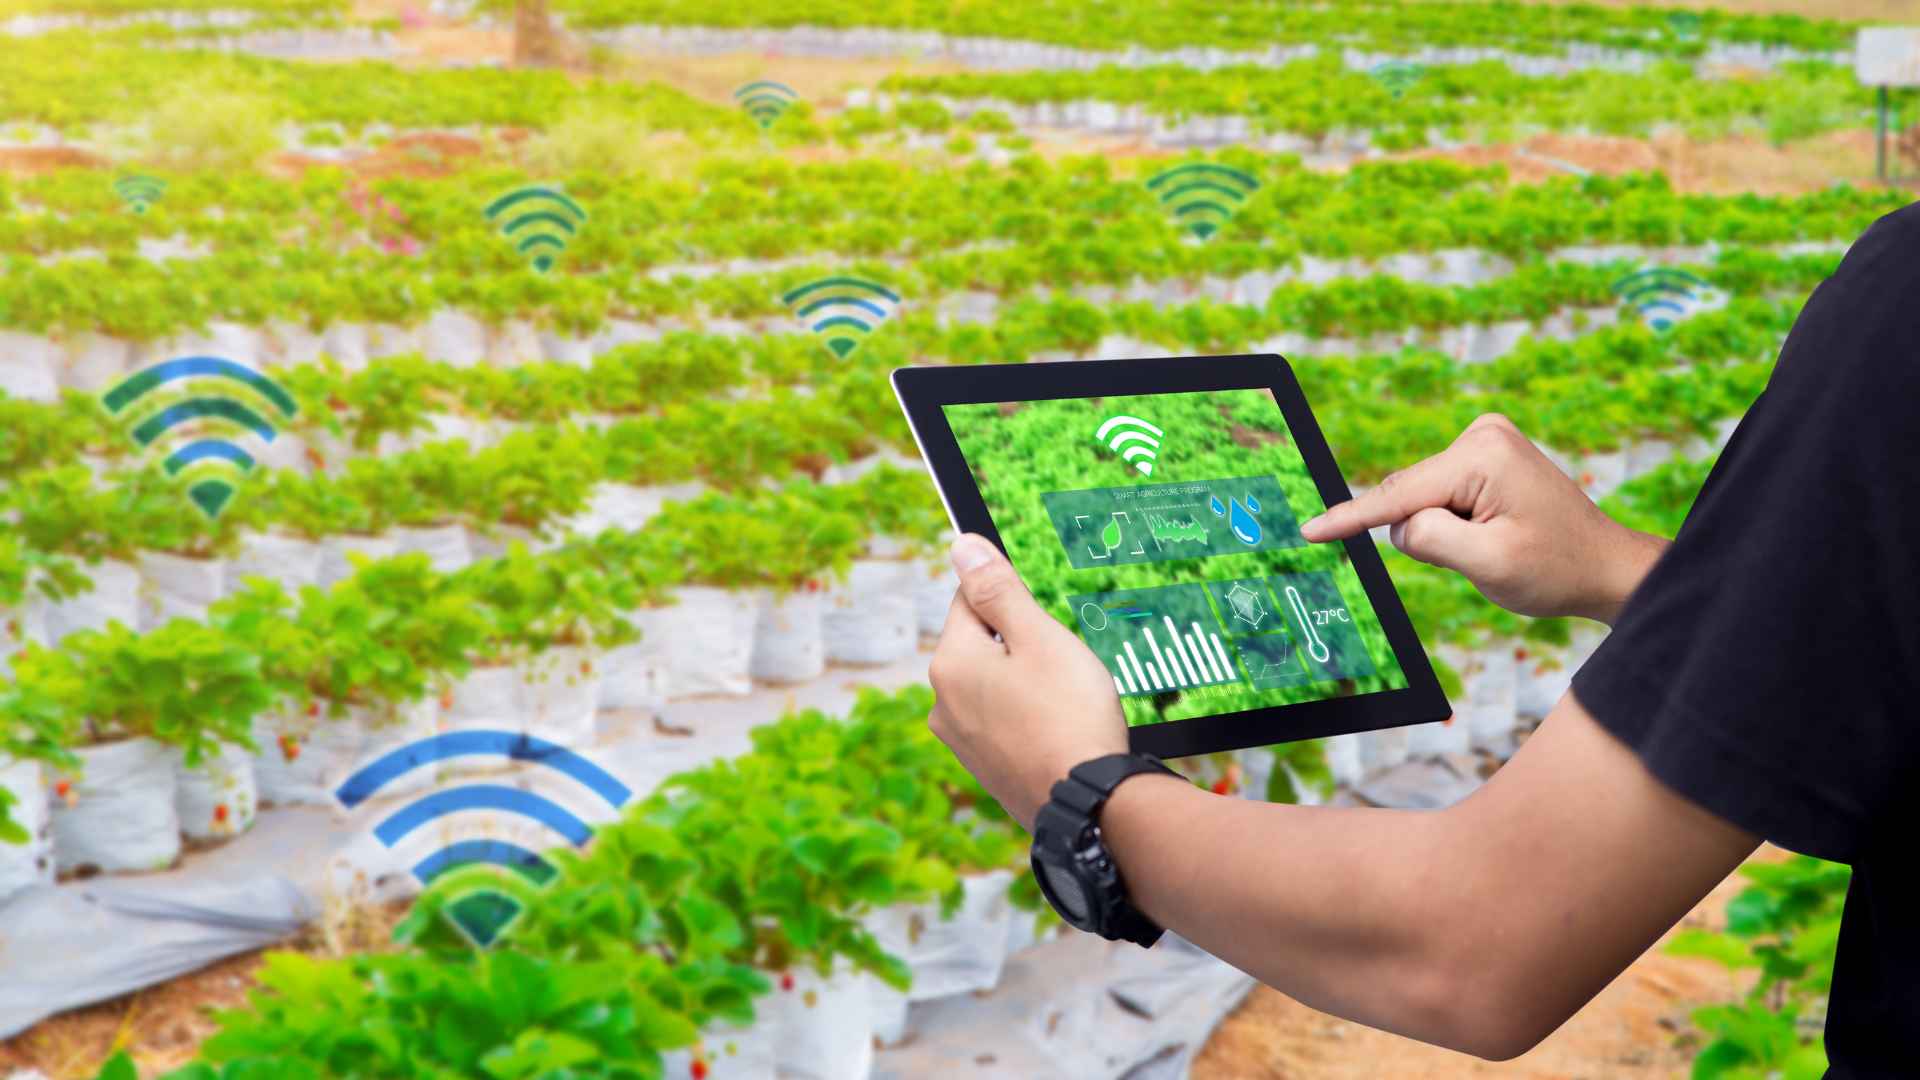 Smart farming: The future of sustainable agriculture